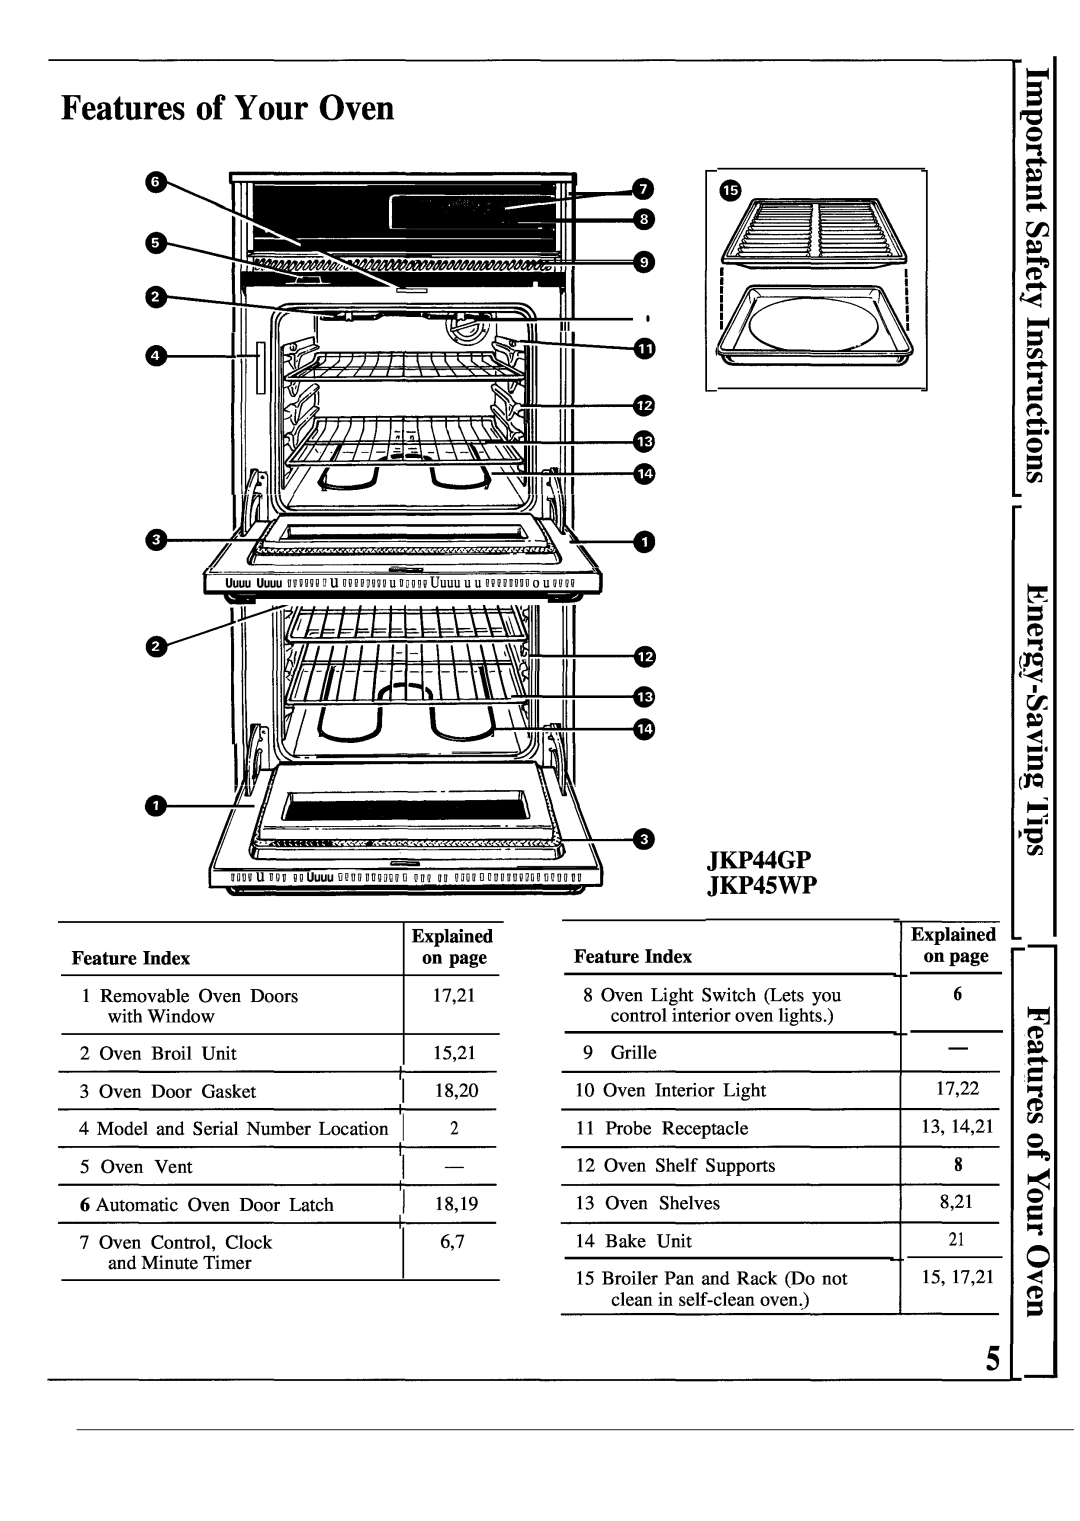 GE manual Features of Your Oven, JKP44GP JKP45WP, Feature Index, Explained on page 